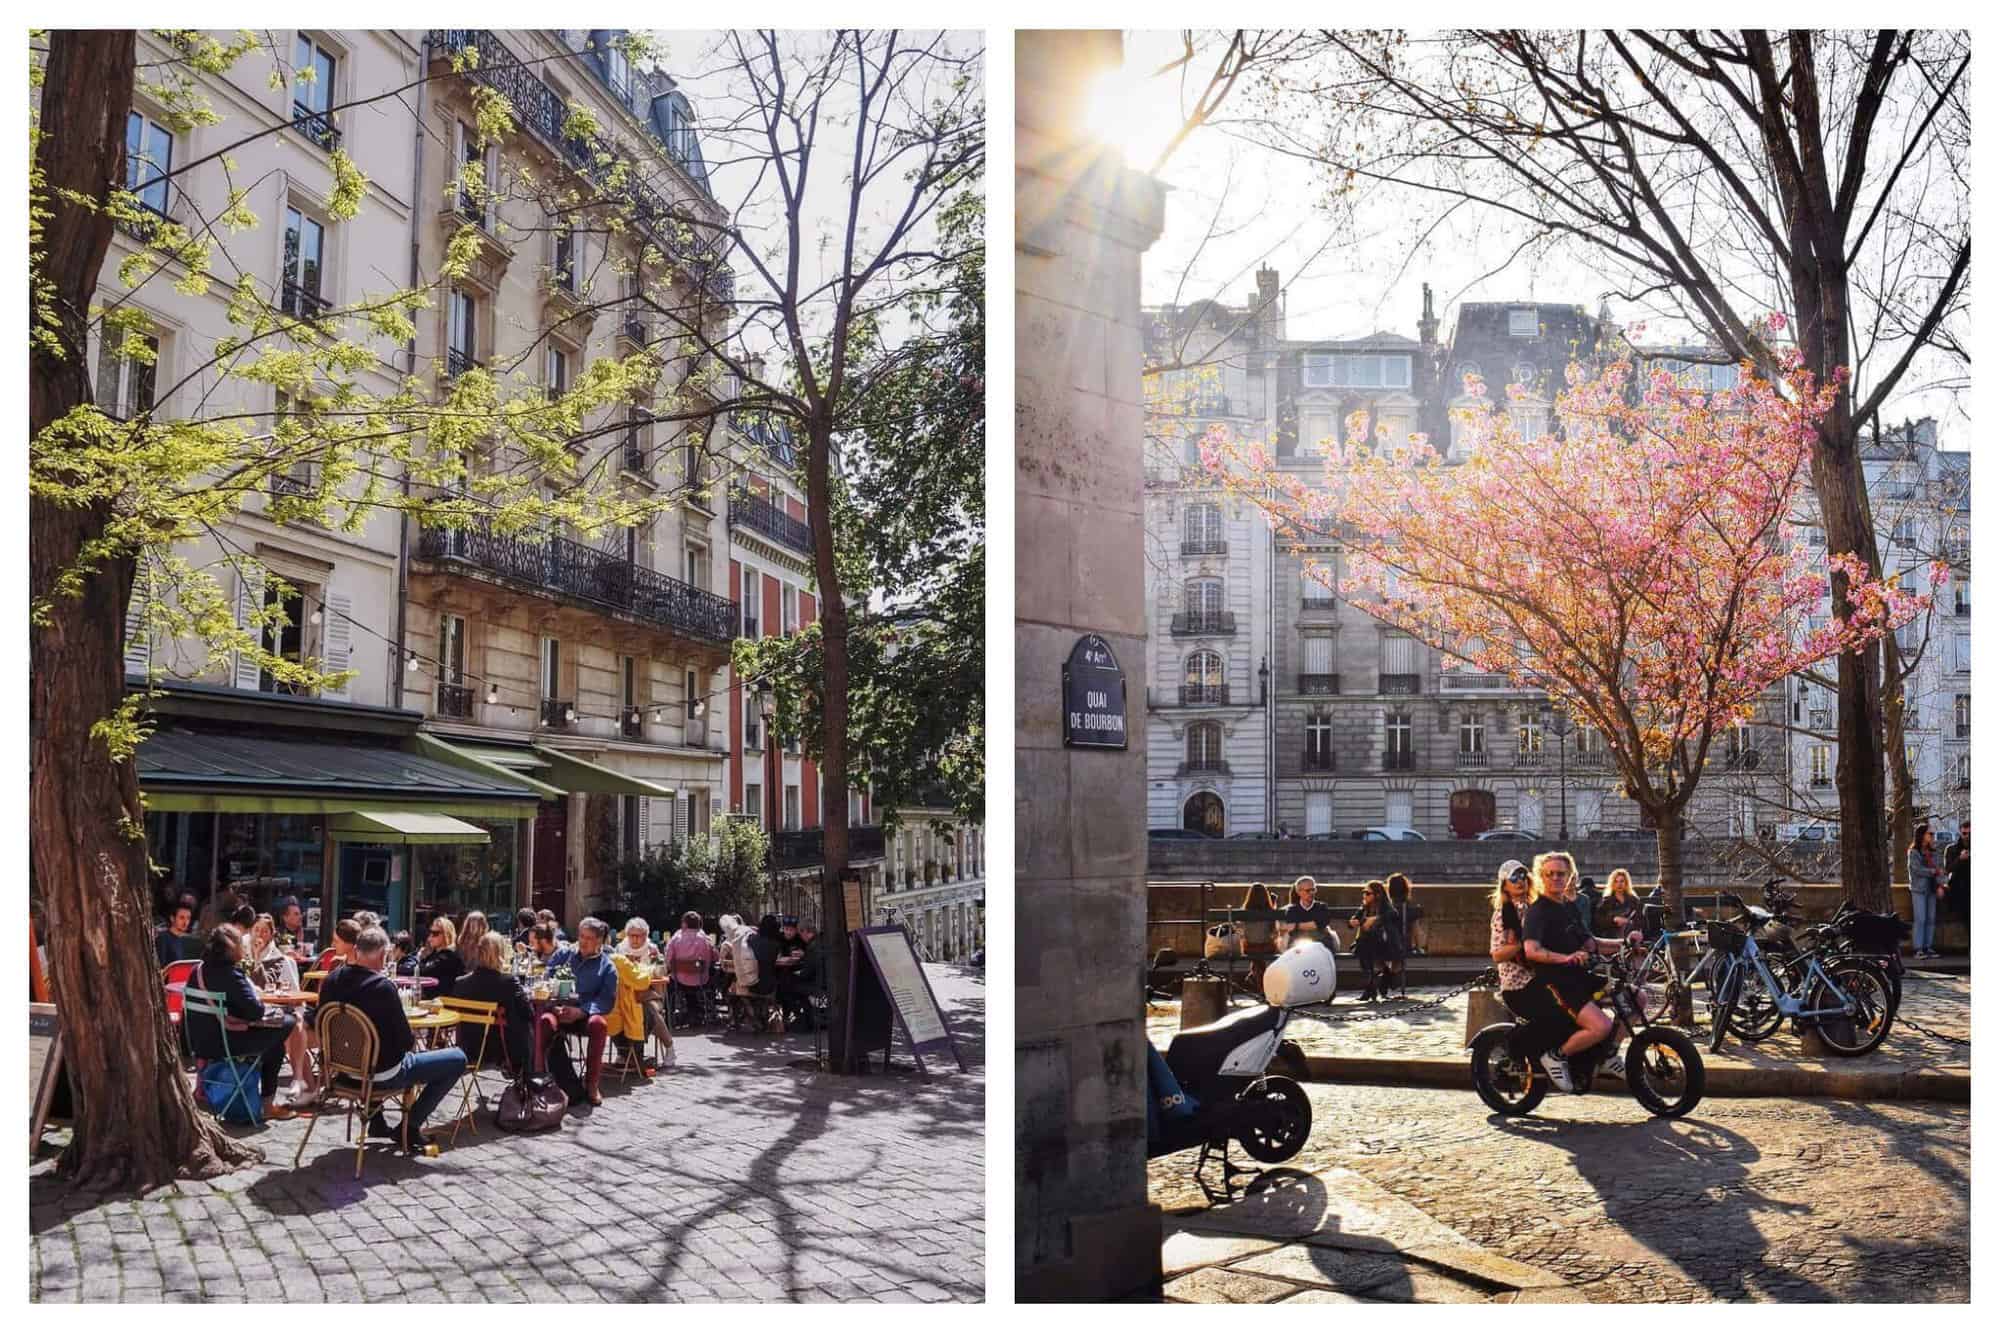 Right: Parisians are dining at an outdoor terrace between two green trees. Right: A couple are riding in a bicycle as they pass through a street with a pink cherry blossom tree.